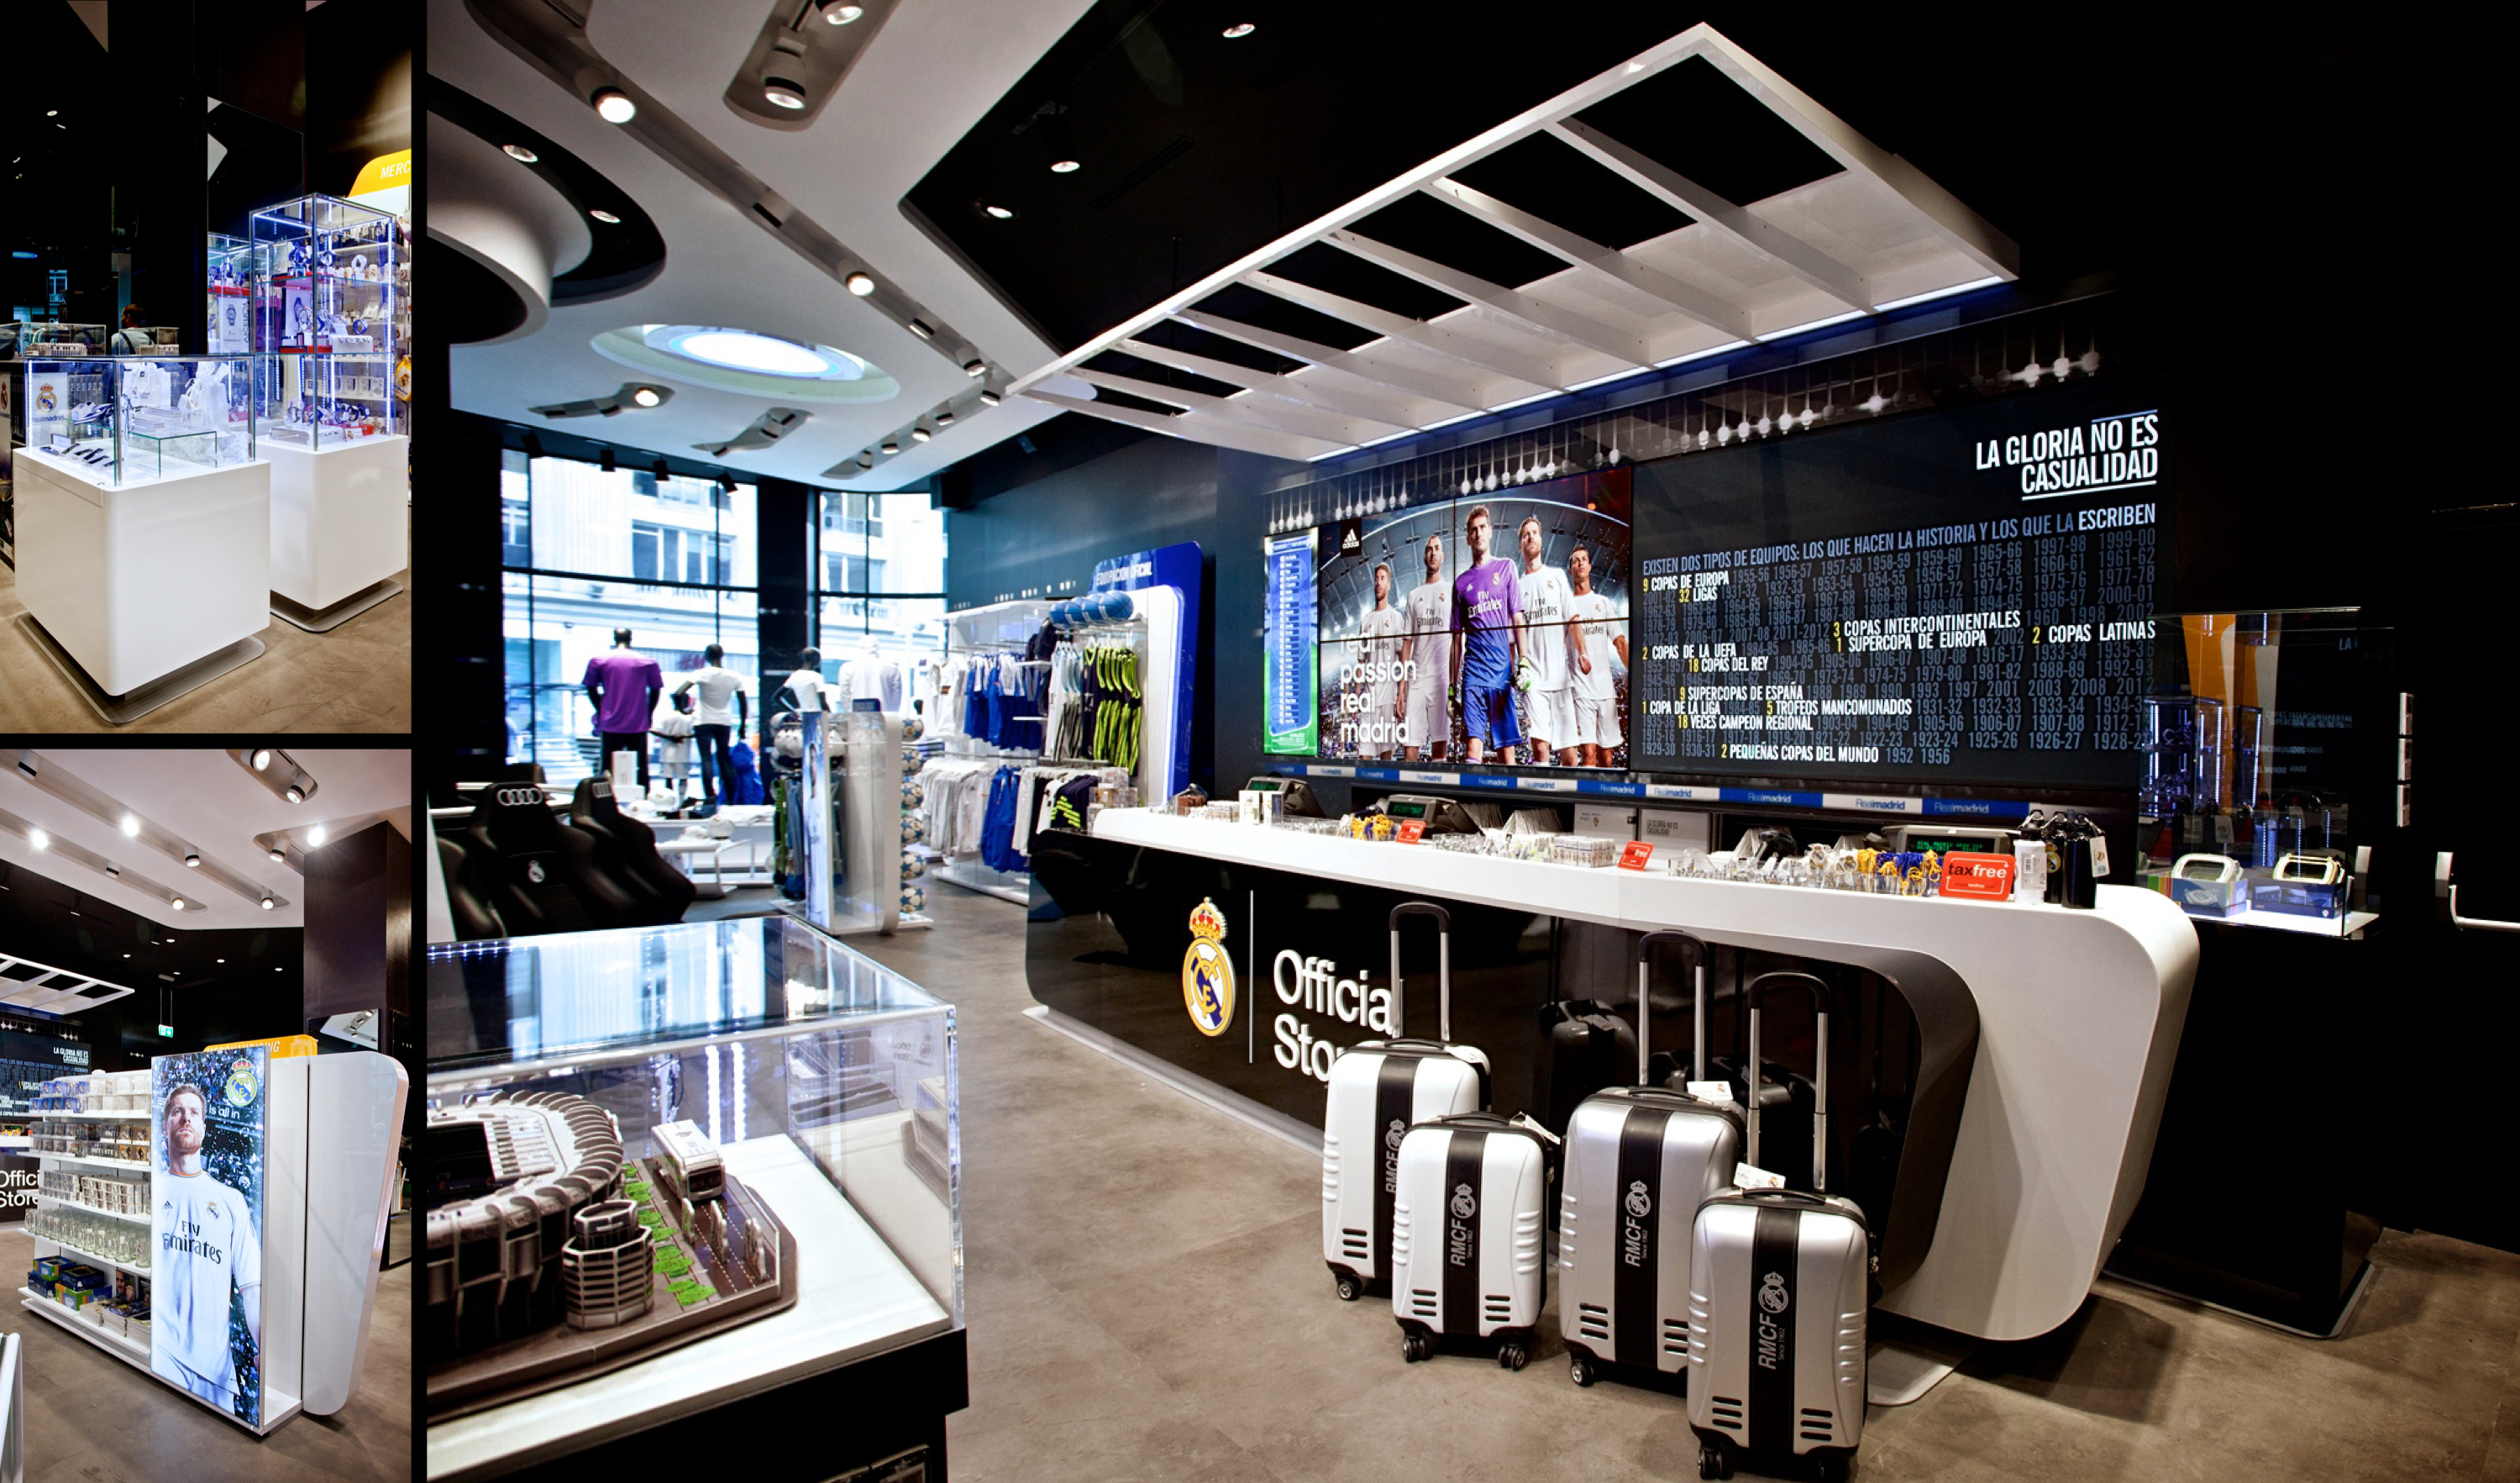 Real Madrid Official Store, Vía 31 | [arquitectura]